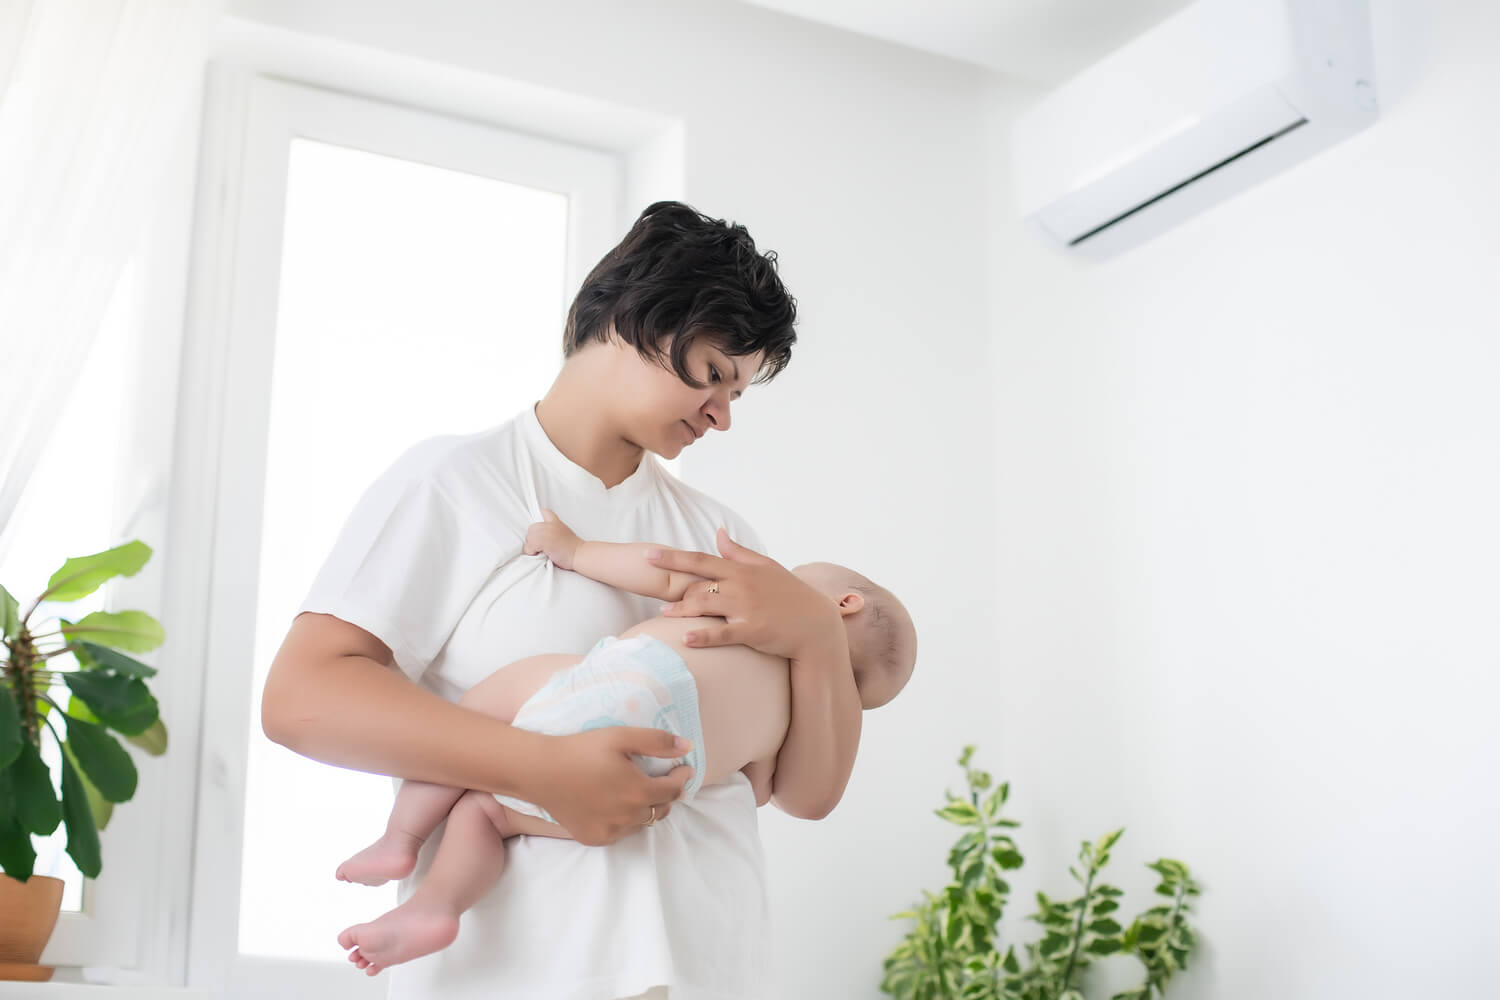 Are Ac or coolers safe for baby